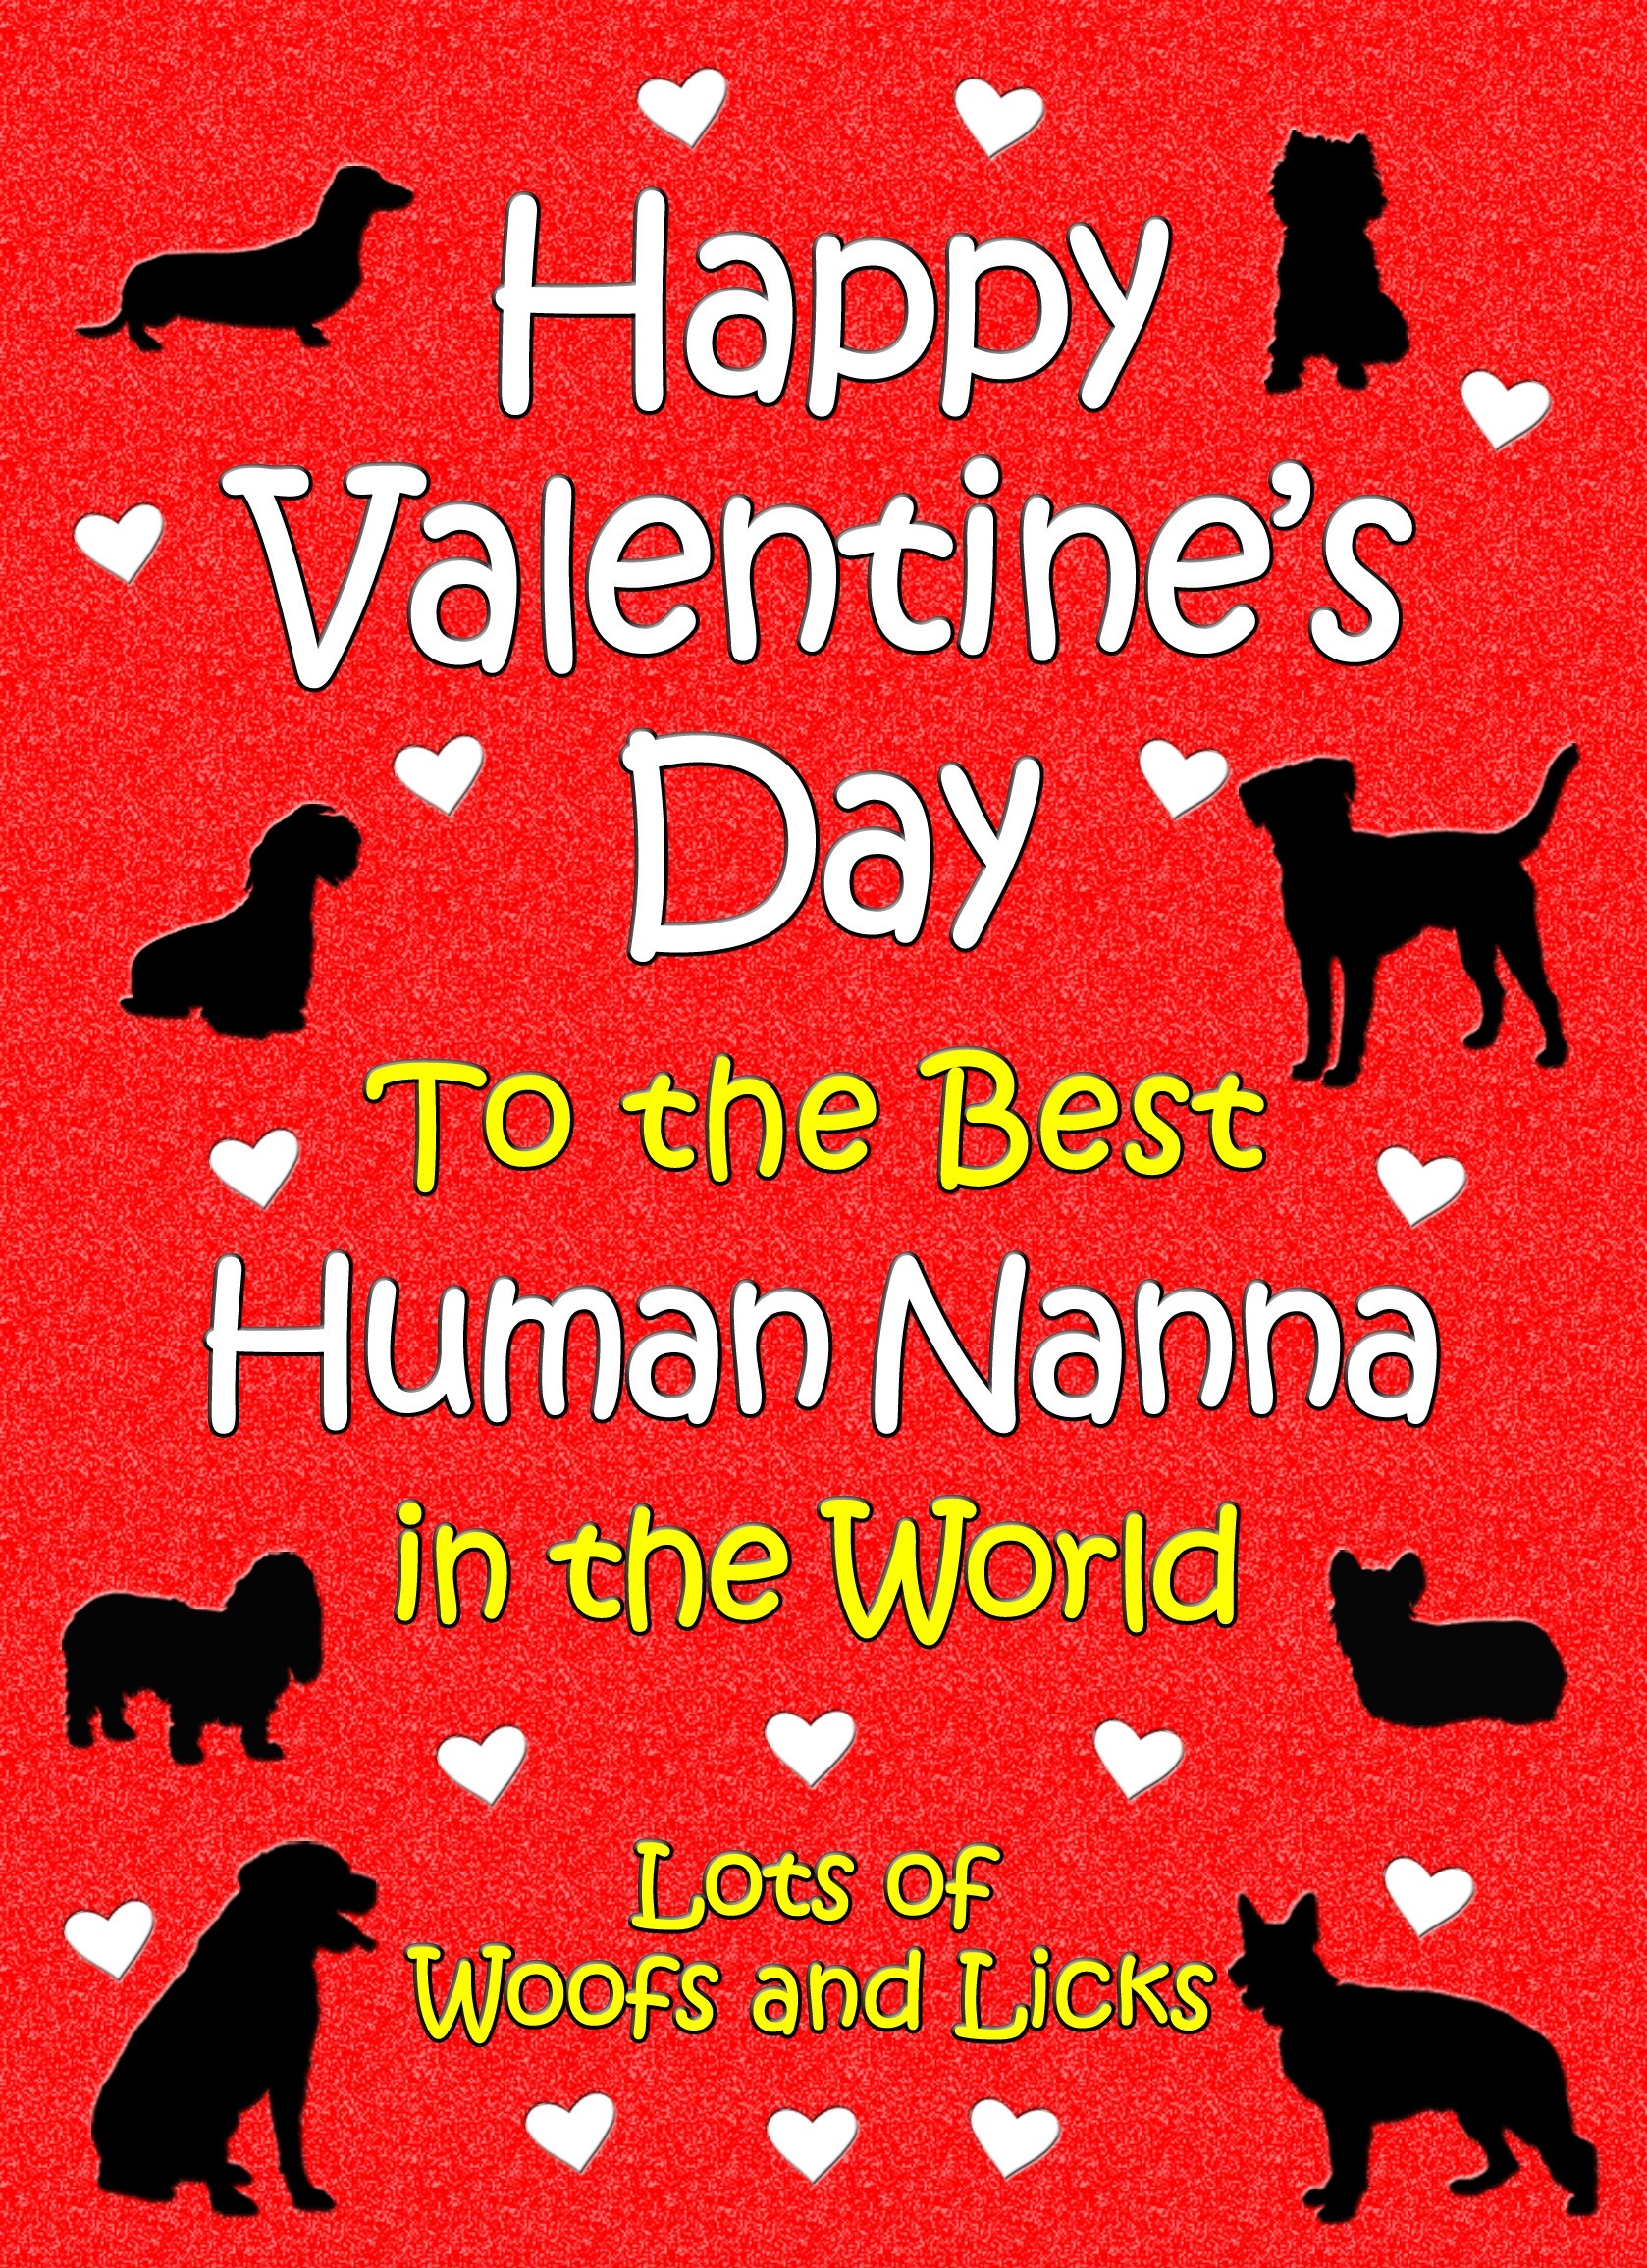 From The Dog Valentines Day Card (Human Nanna)